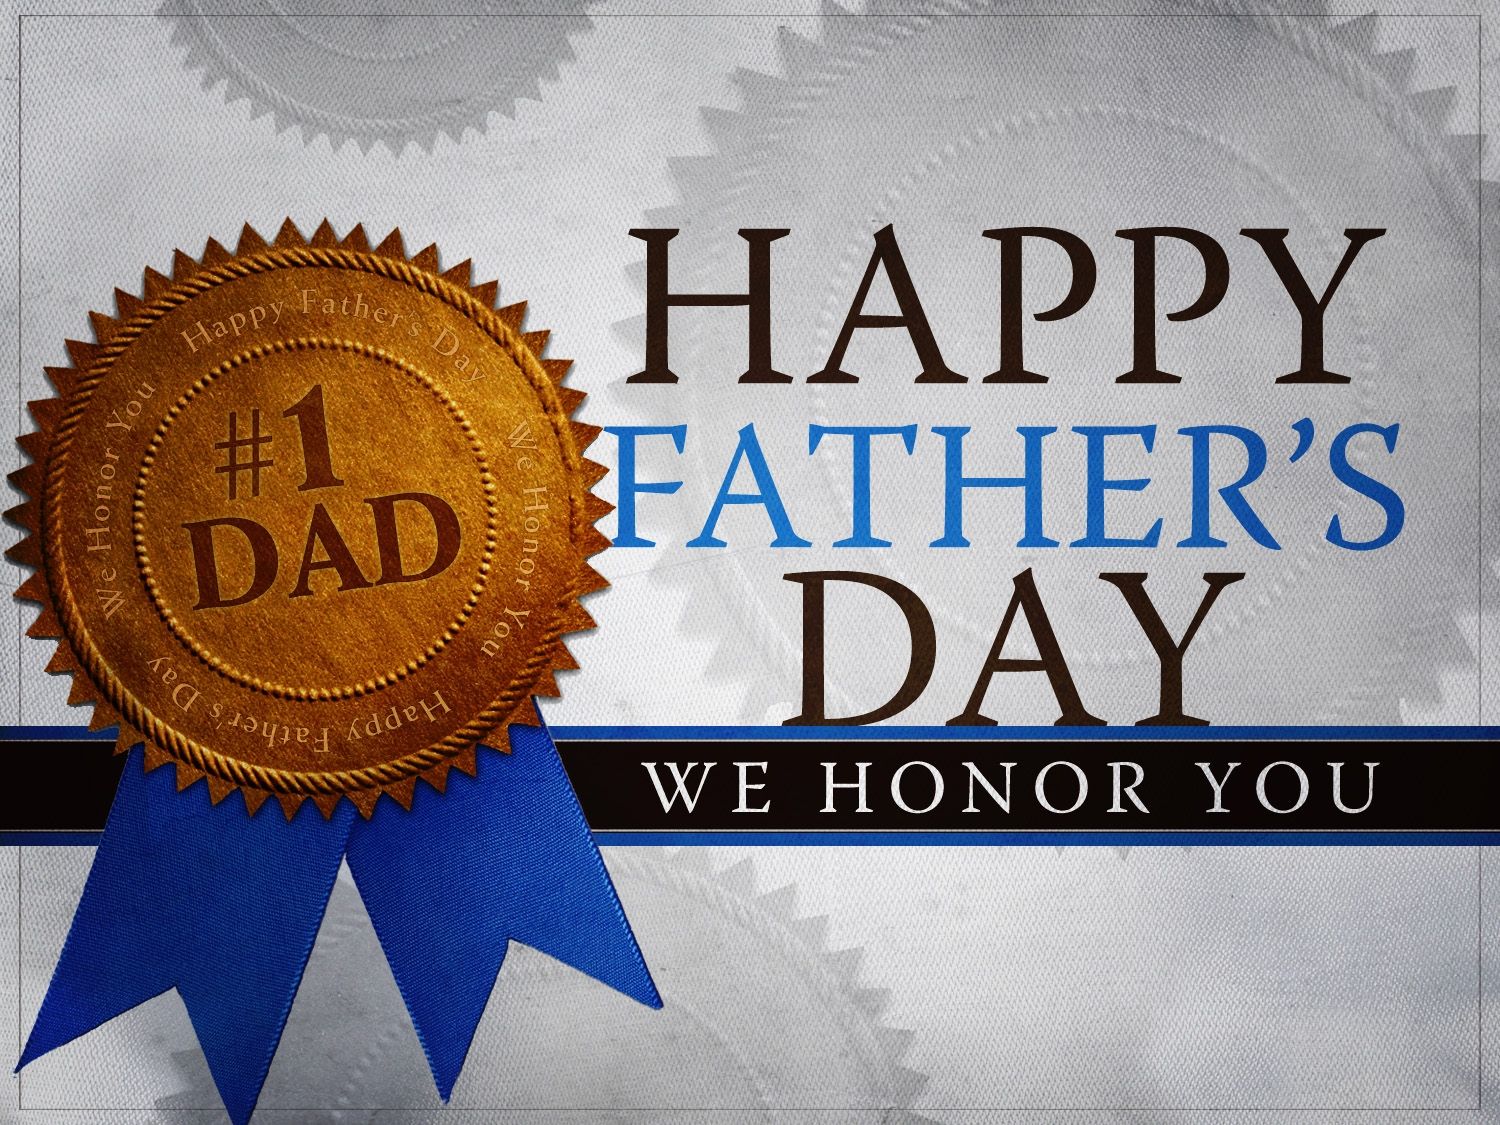 Happy Father's Day!! Message Place